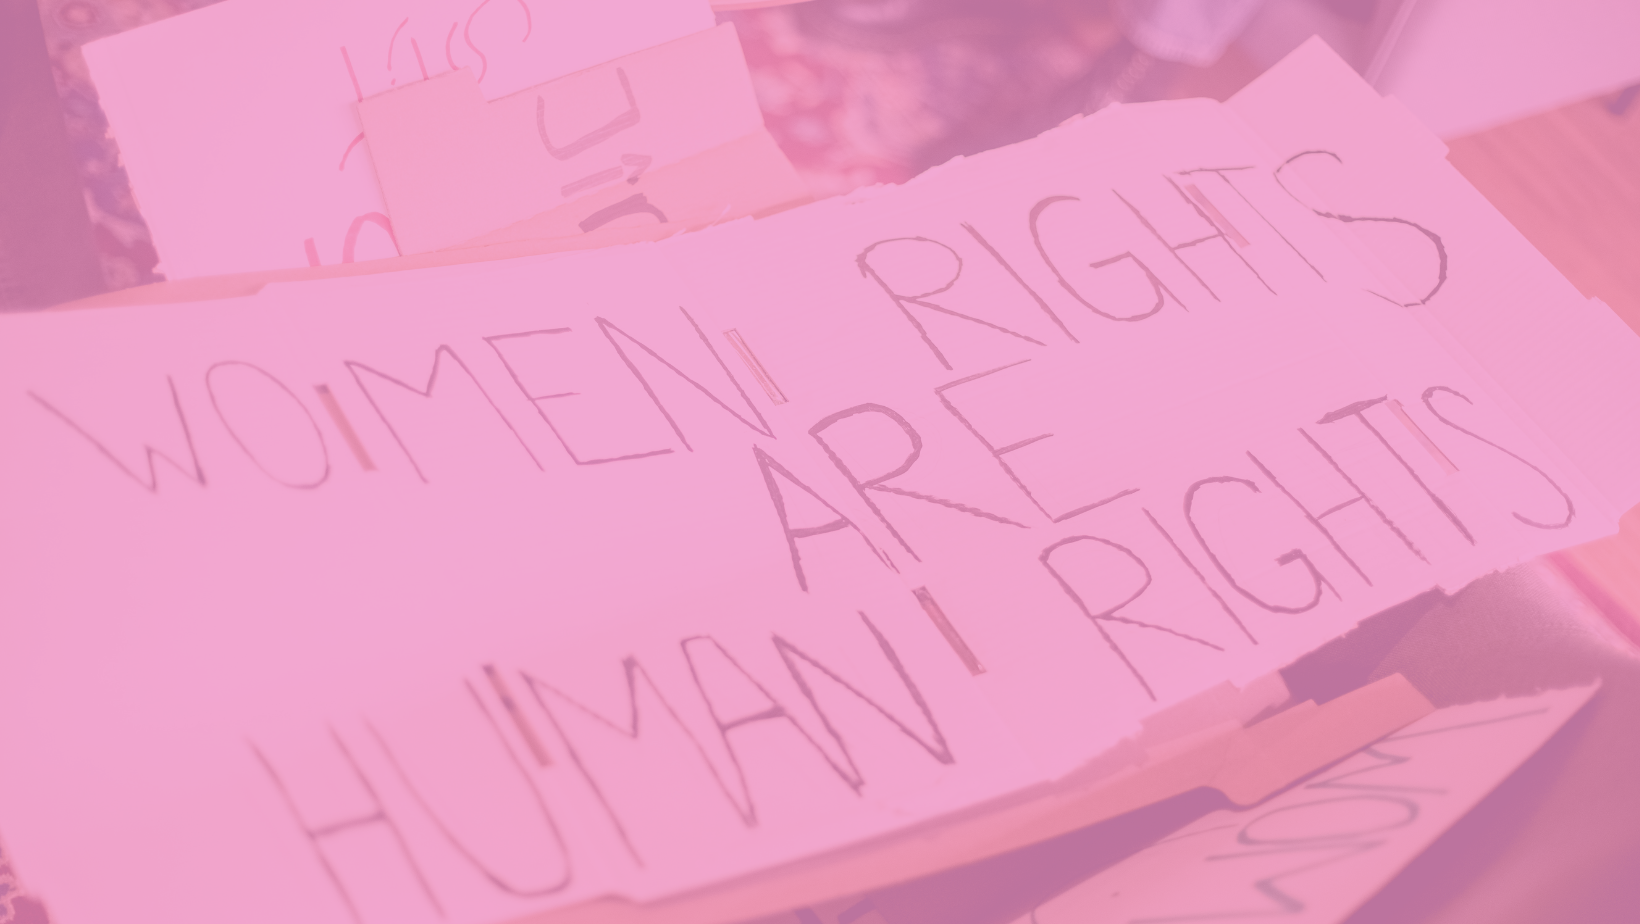 Women's Rights are Human Rights Sign | Abortion Petition